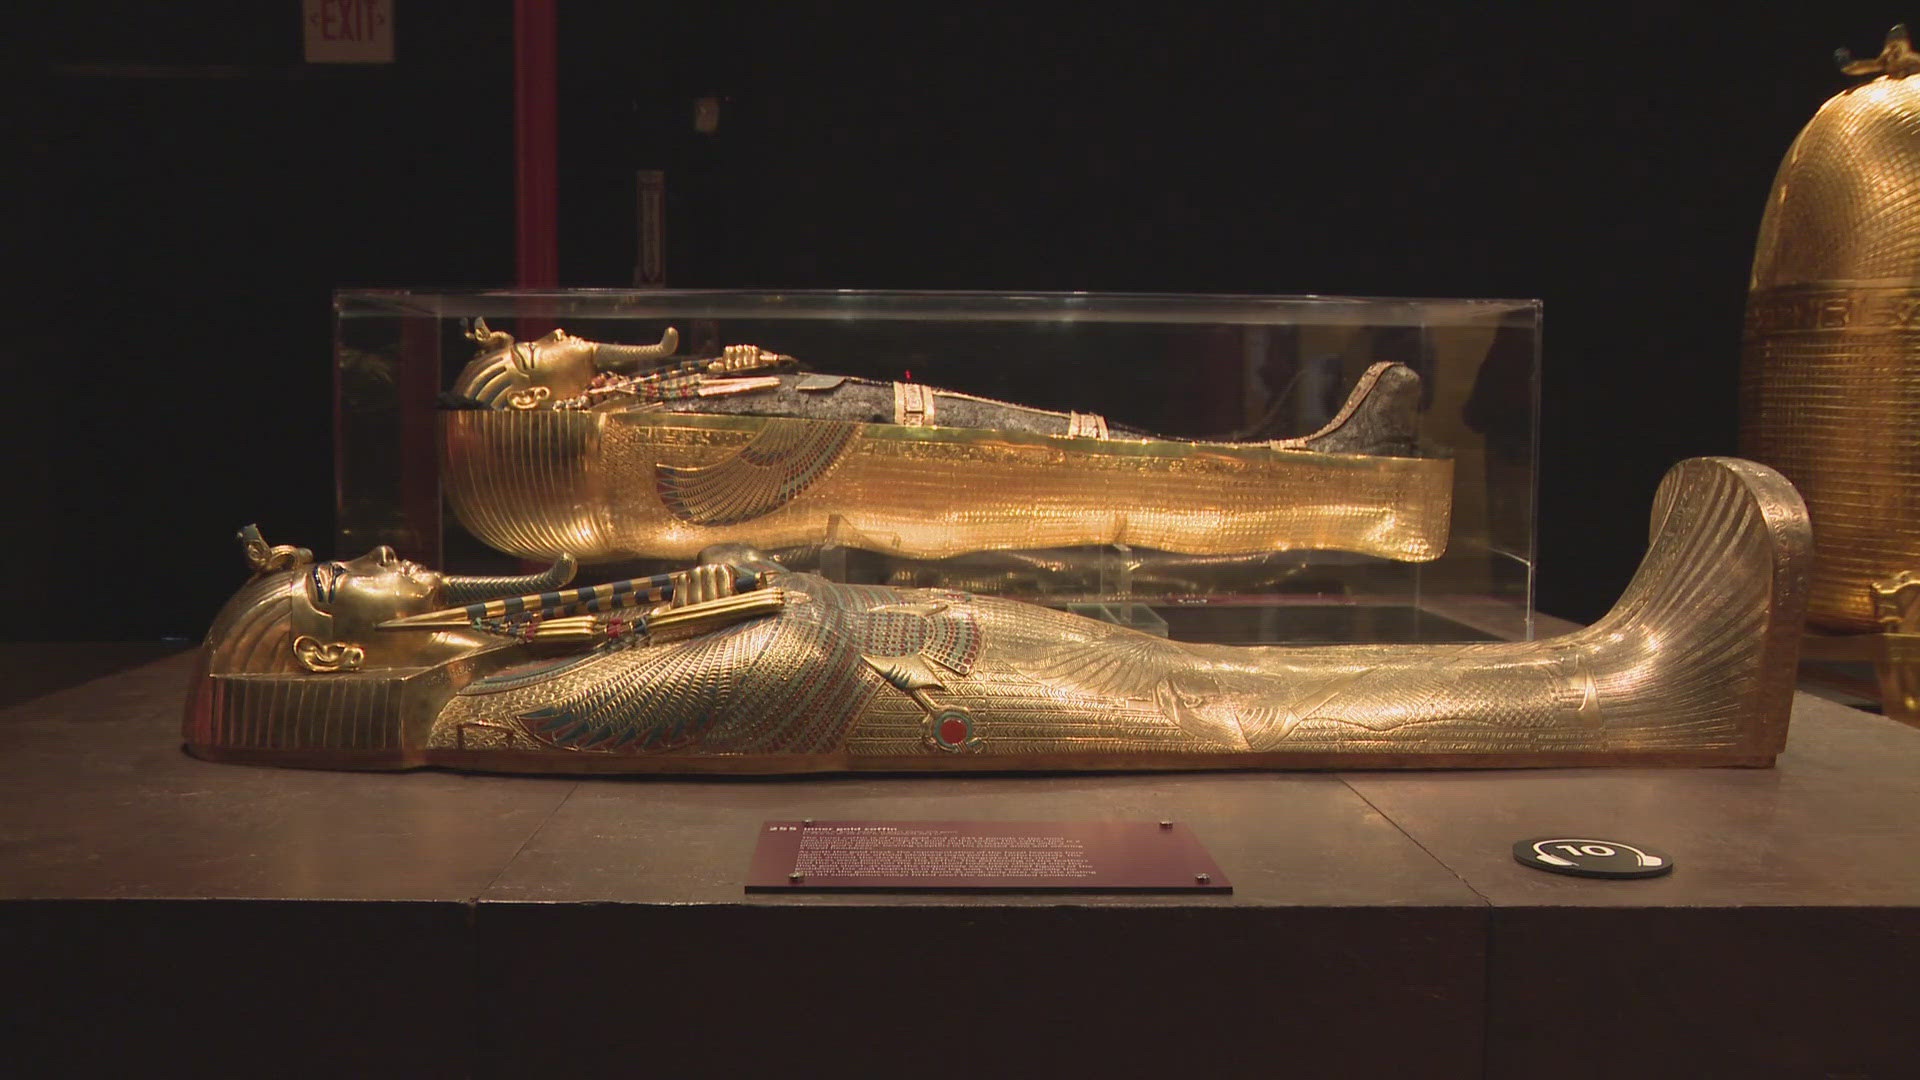 The King Tut exhibit runs from tomorrow through July 31st at the Rhode Island Center in Northeast Washington. Tickets are available online